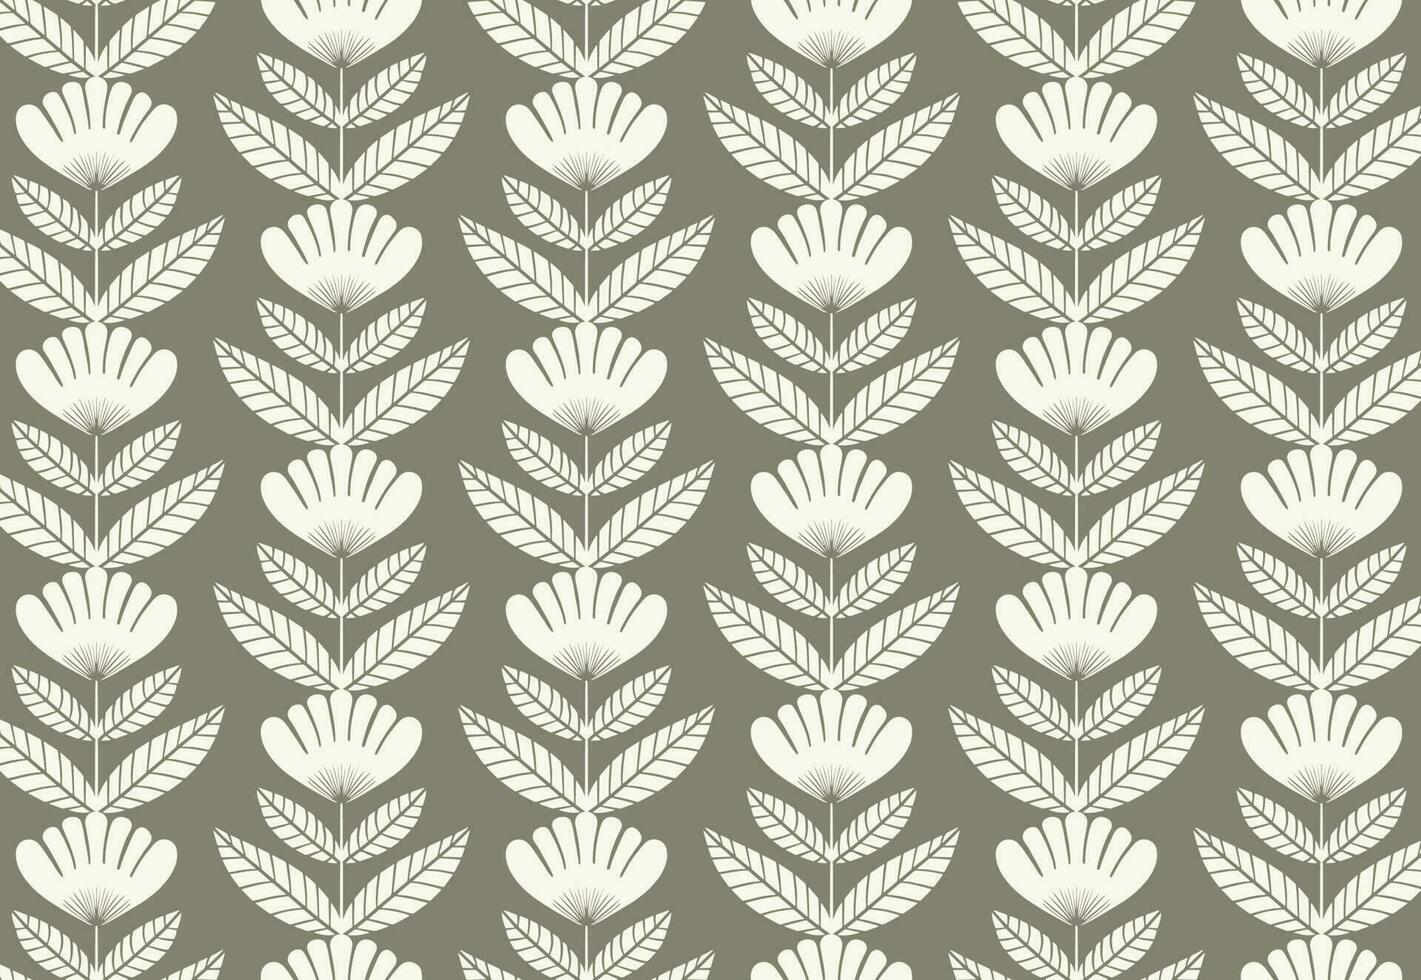 Floral seamless pattern design. Hand drawn beige flowers on green background. Ornate vector florals for stationery, textile design.